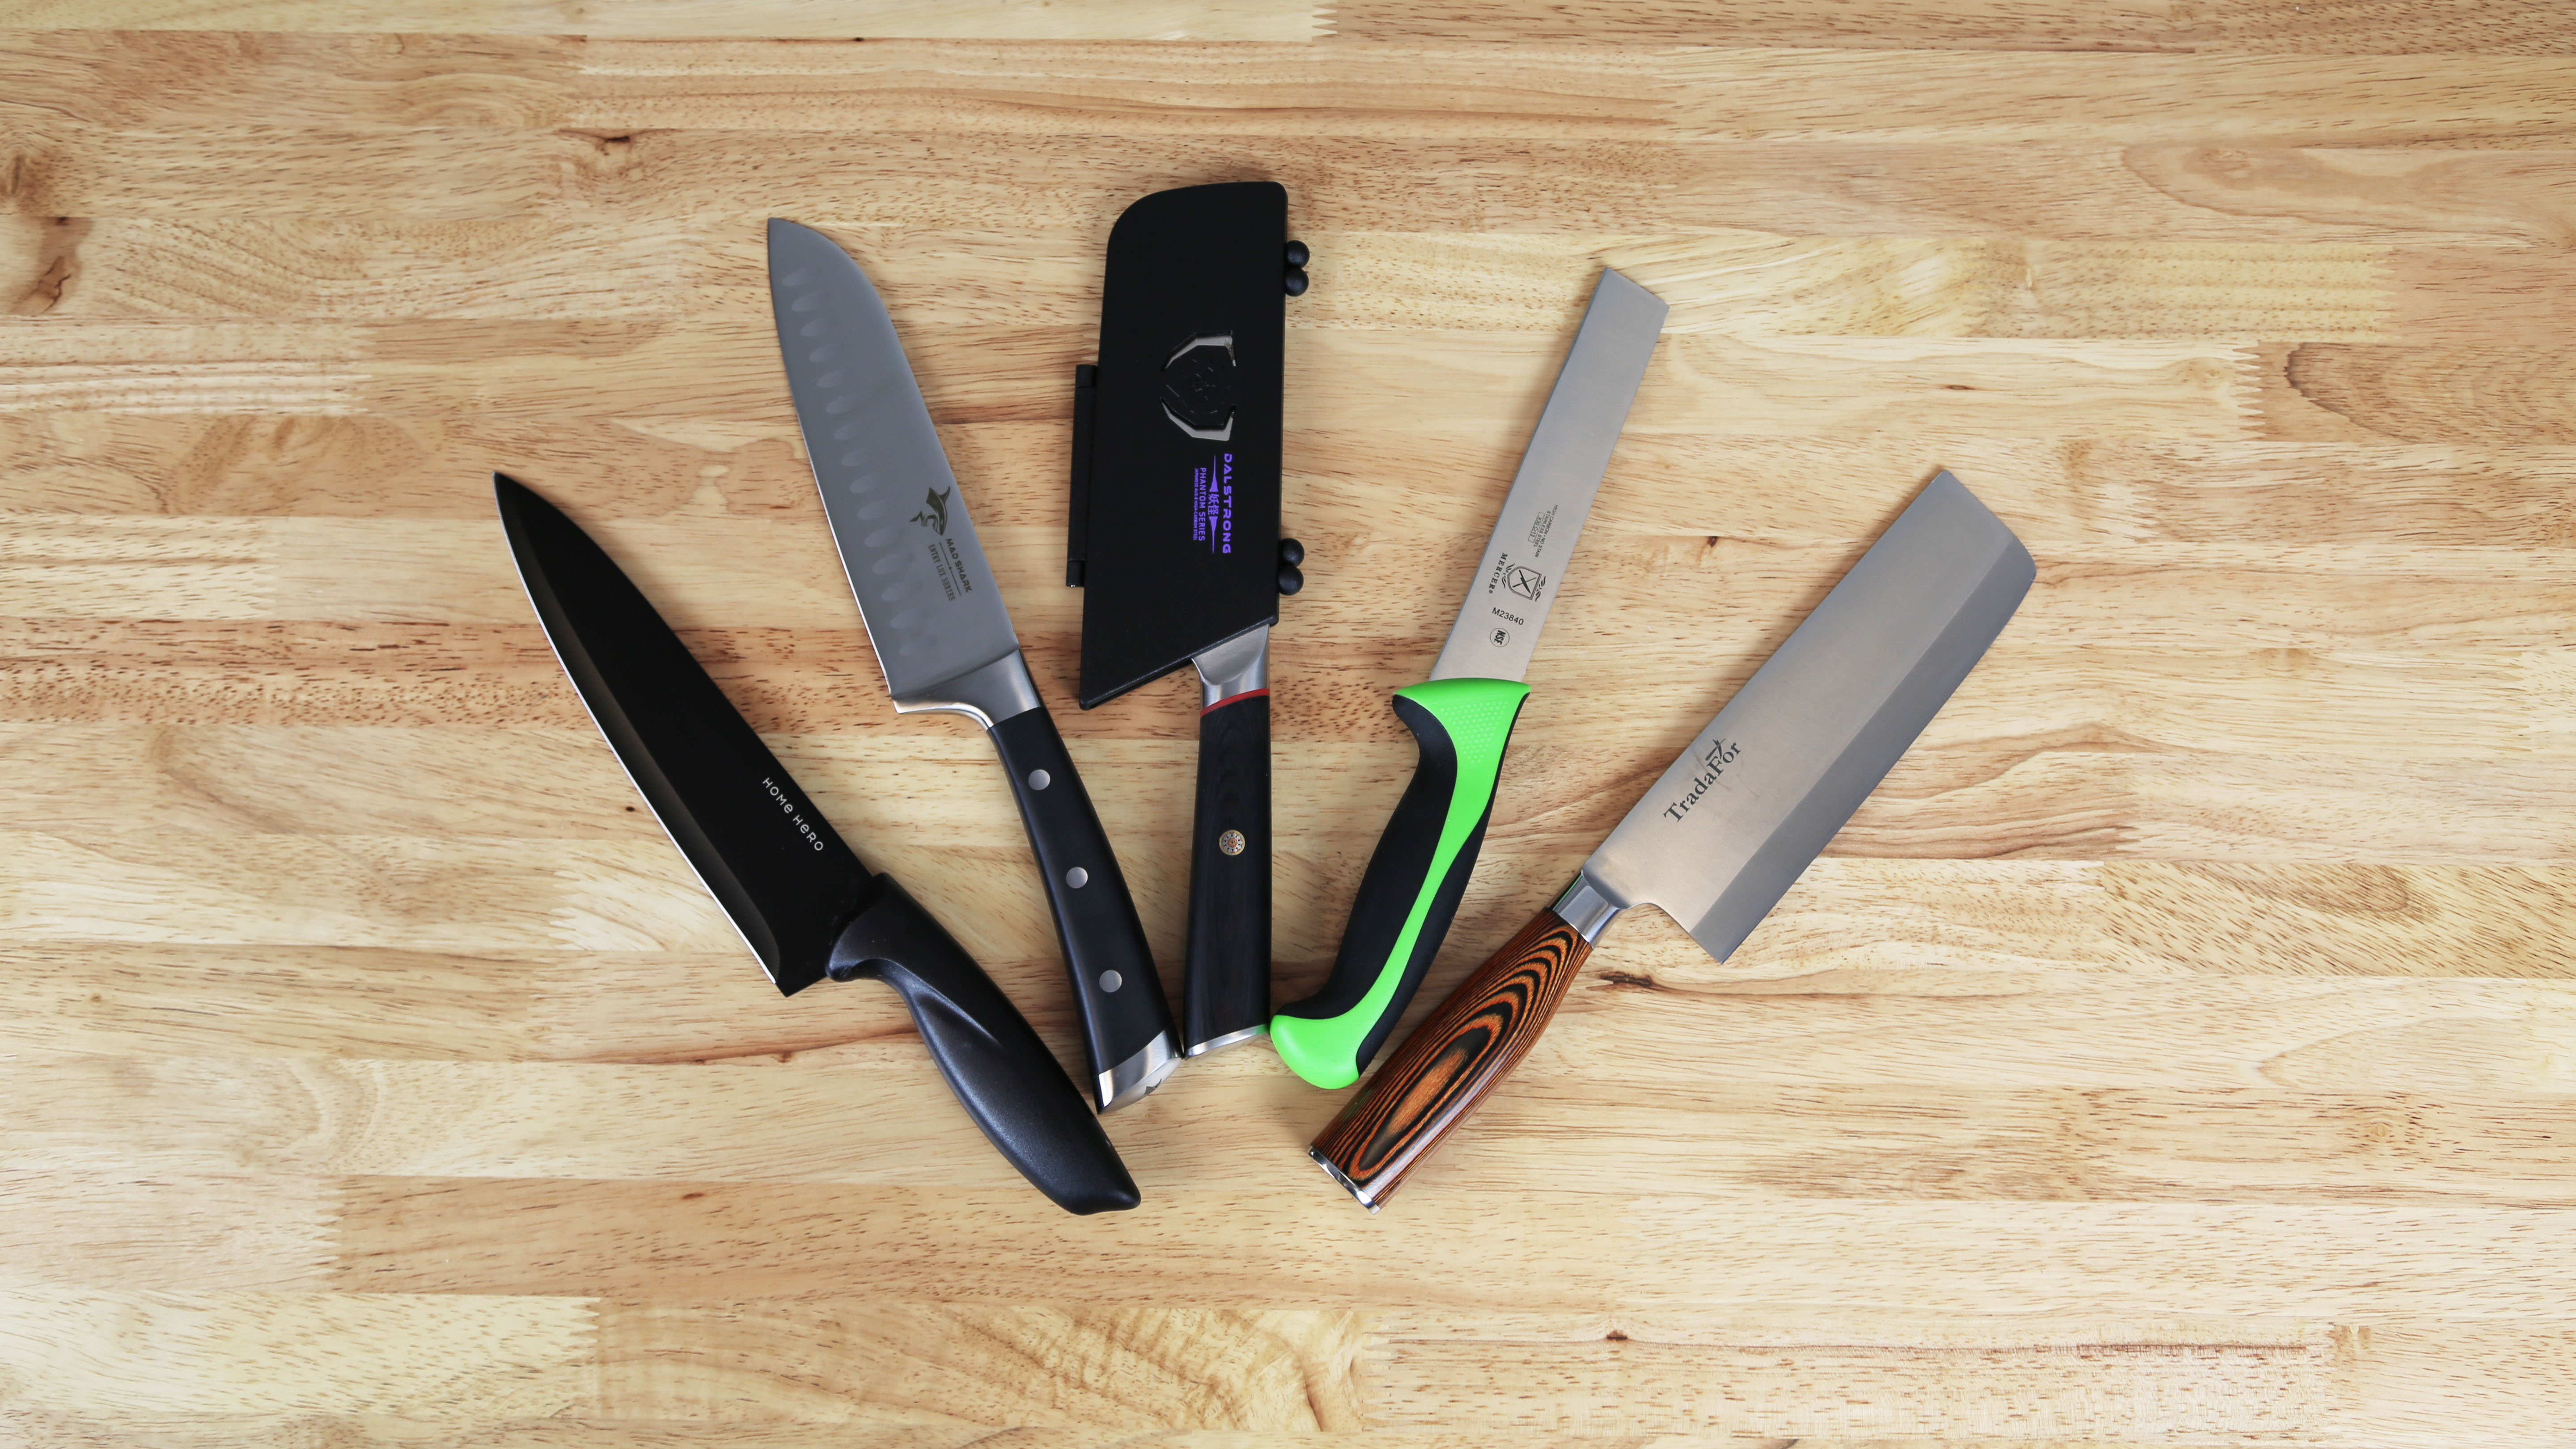 Cutting Vegetables: Which Is the Best Vegetable Knife? – santokuknives